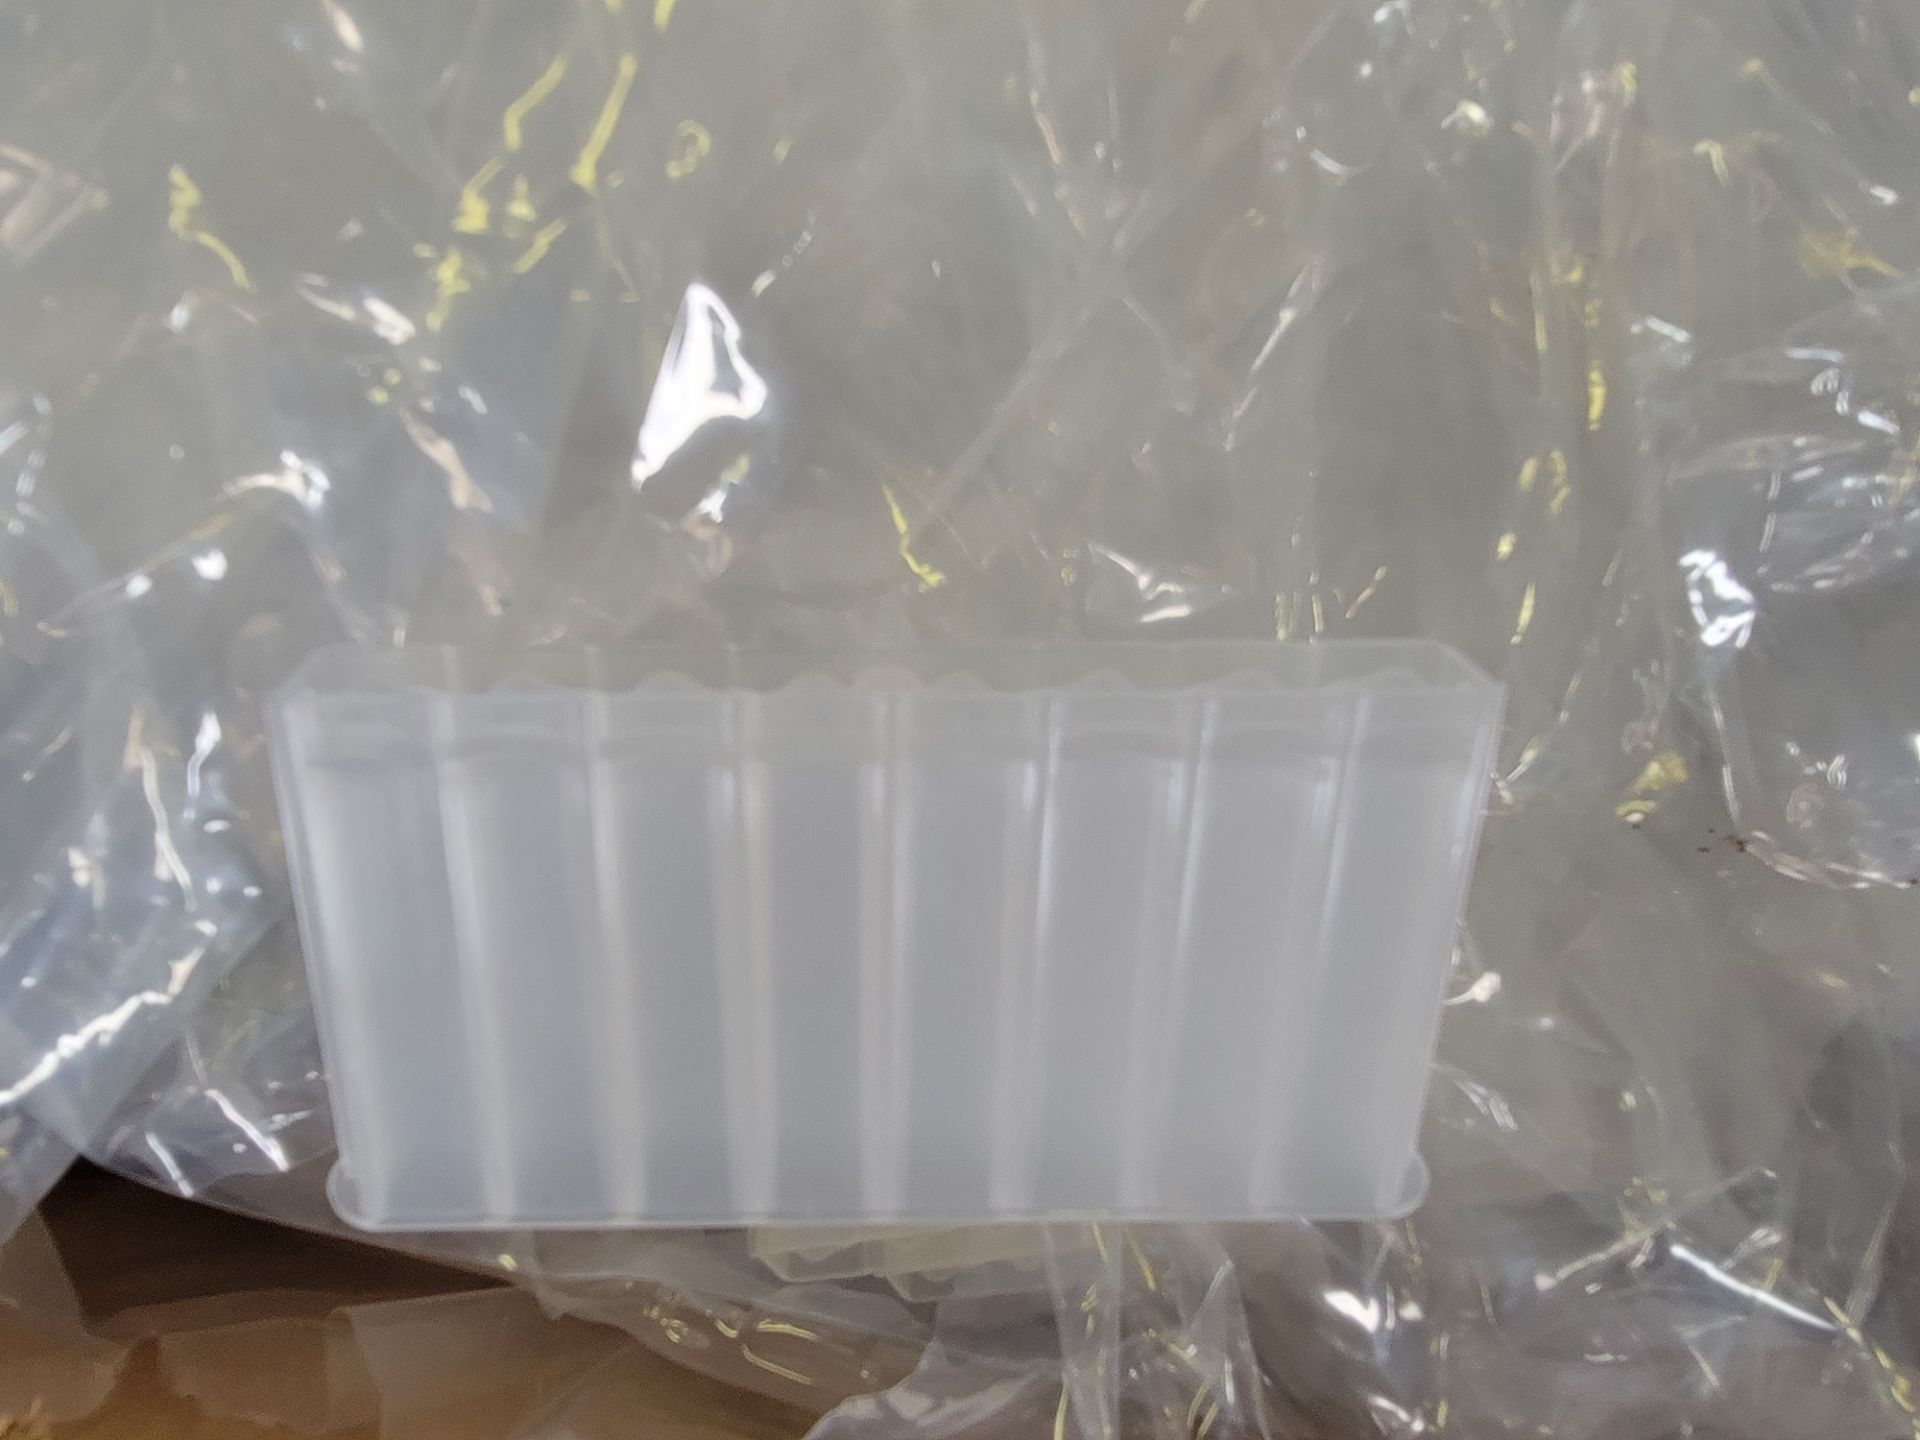 BOXES OF DYNEX DILUSION STRIP 62910 7X - Image 3 of 3